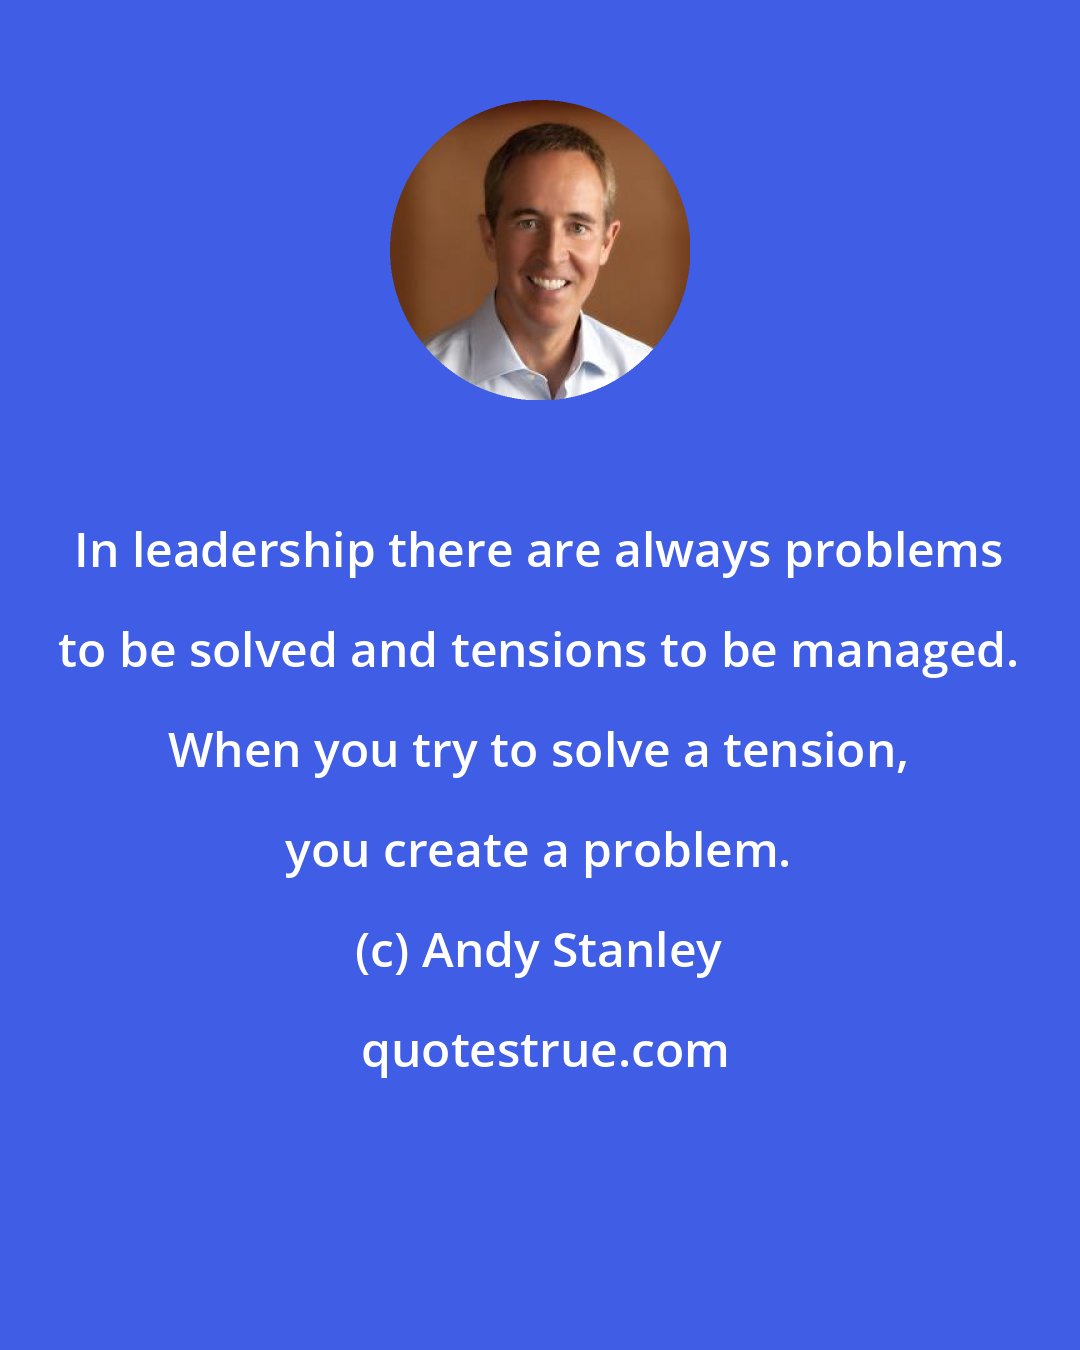 Andy Stanley: In leadership there are always problems to be solved and tensions to be managed. When you try to solve a tension, you create a problem.